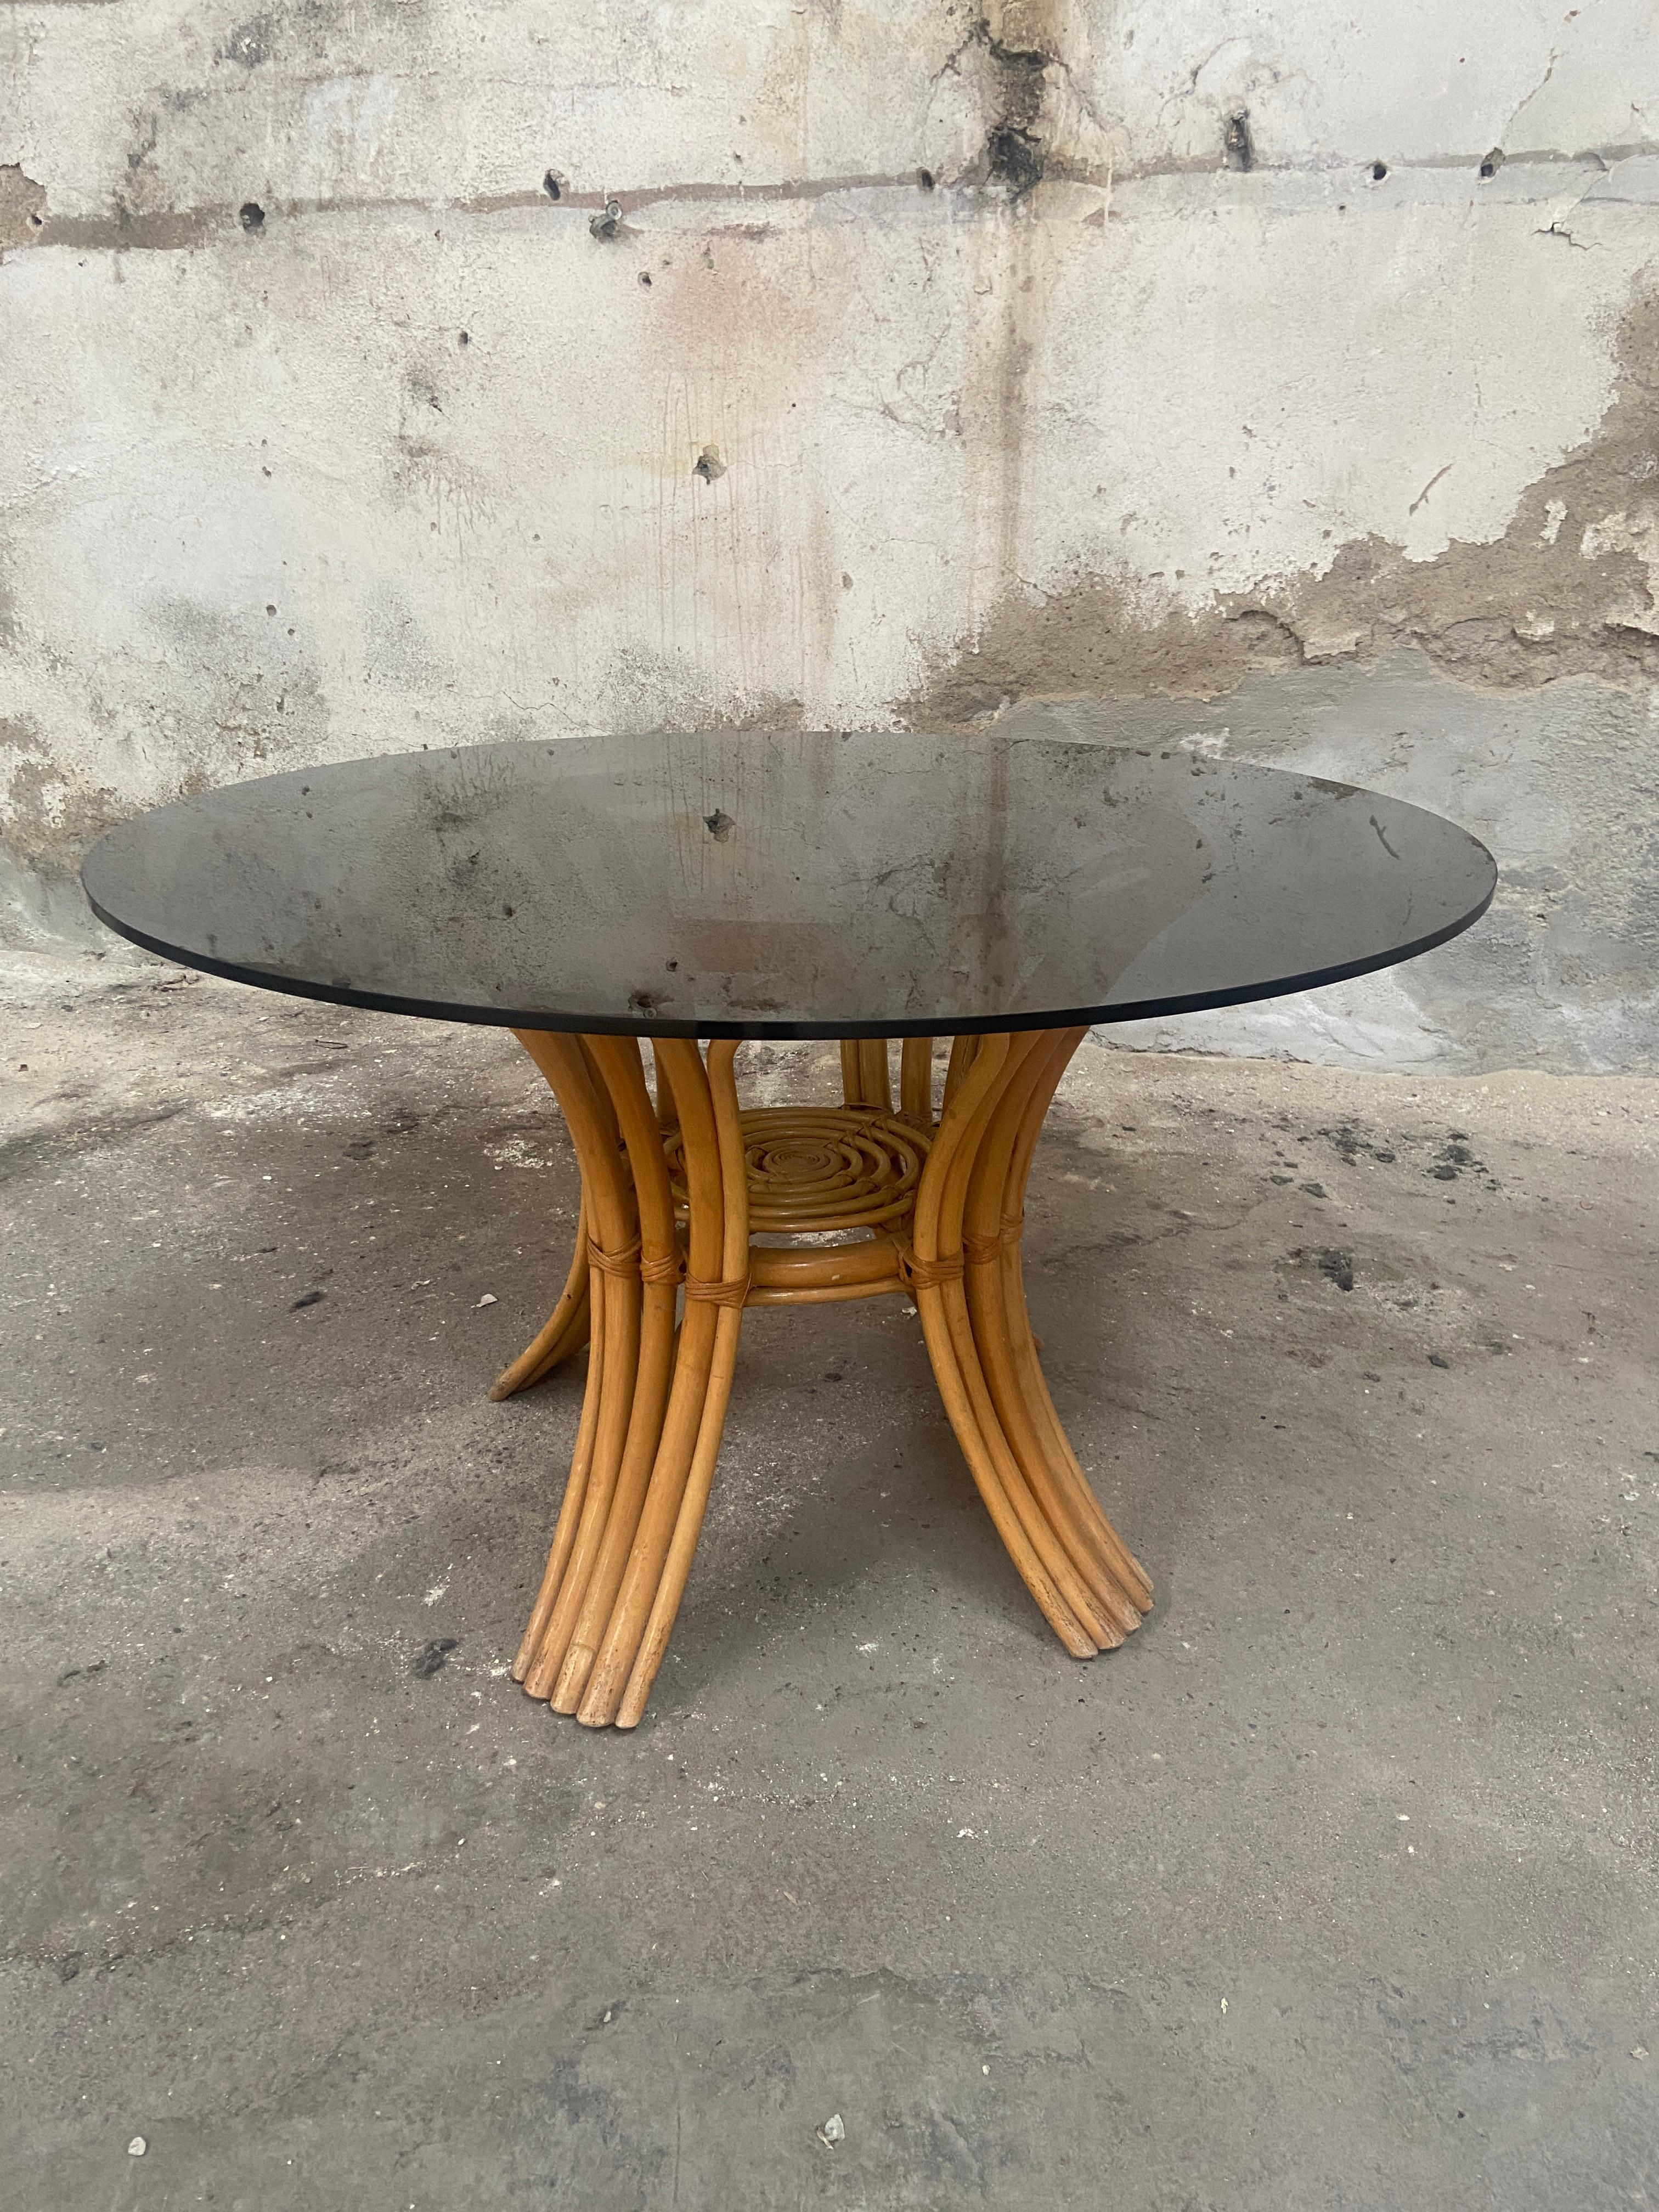 Mid-Cenruty Modern Italian Bamboo Dining or Center Table with Smoked Glass round Top from 1970s
Both the table and the glass are in really good vintage conditions.